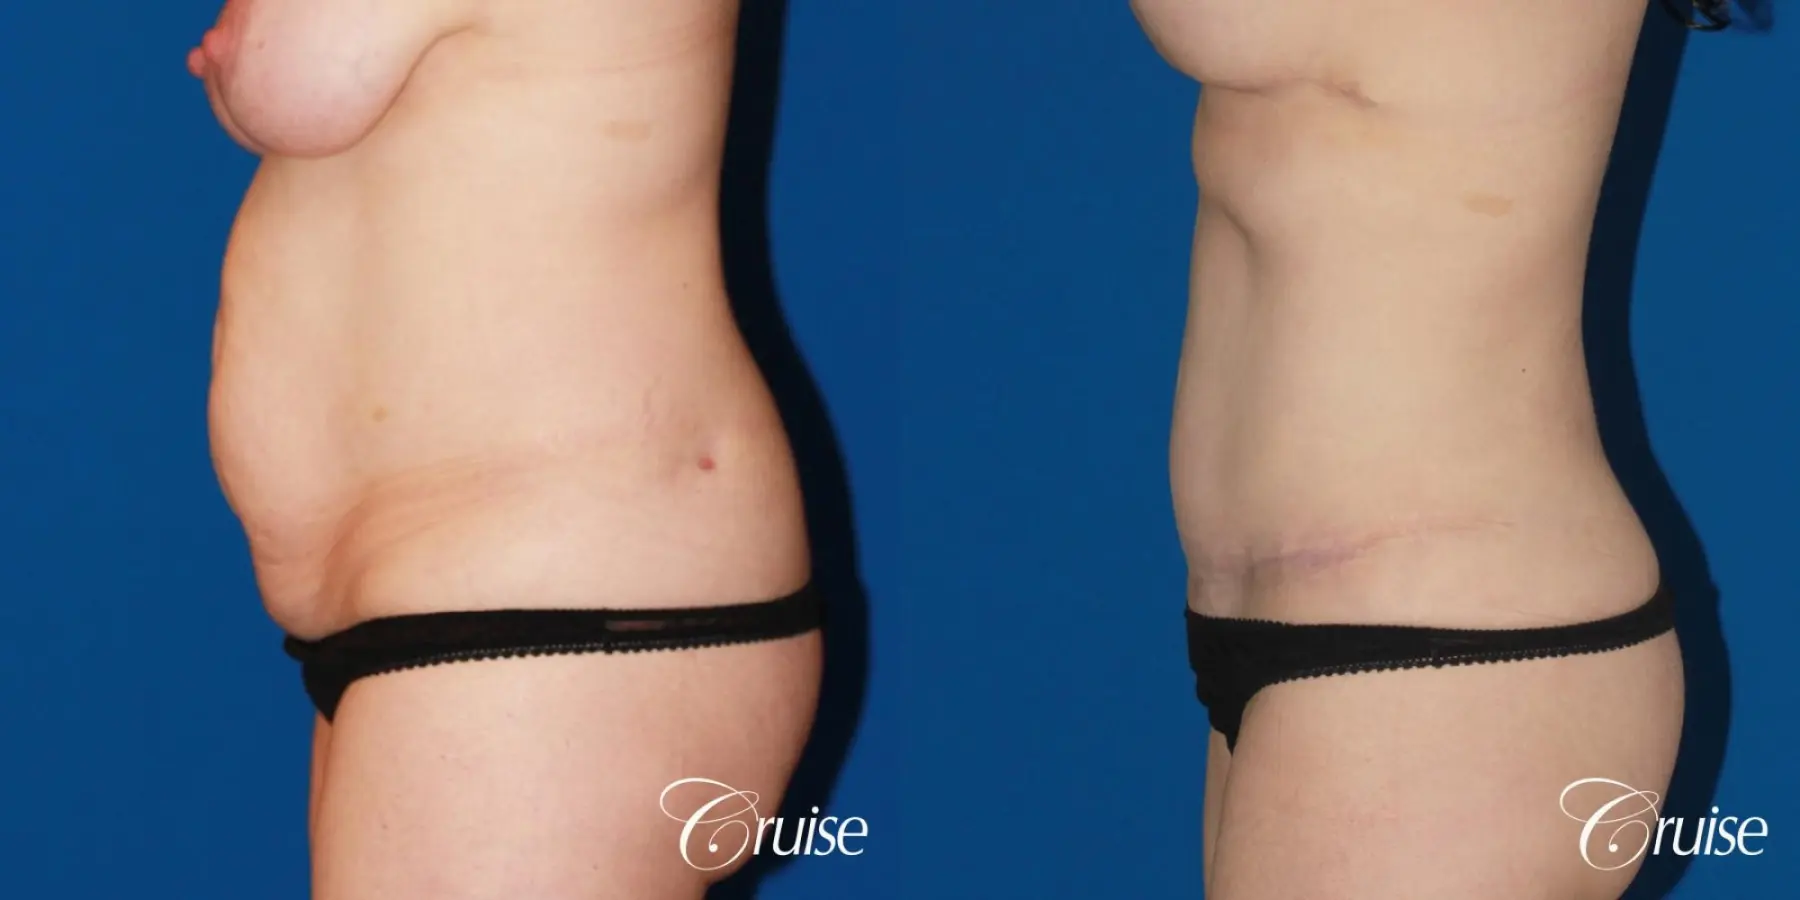 Tummy Tuck: Patient 20 - Before and After 2